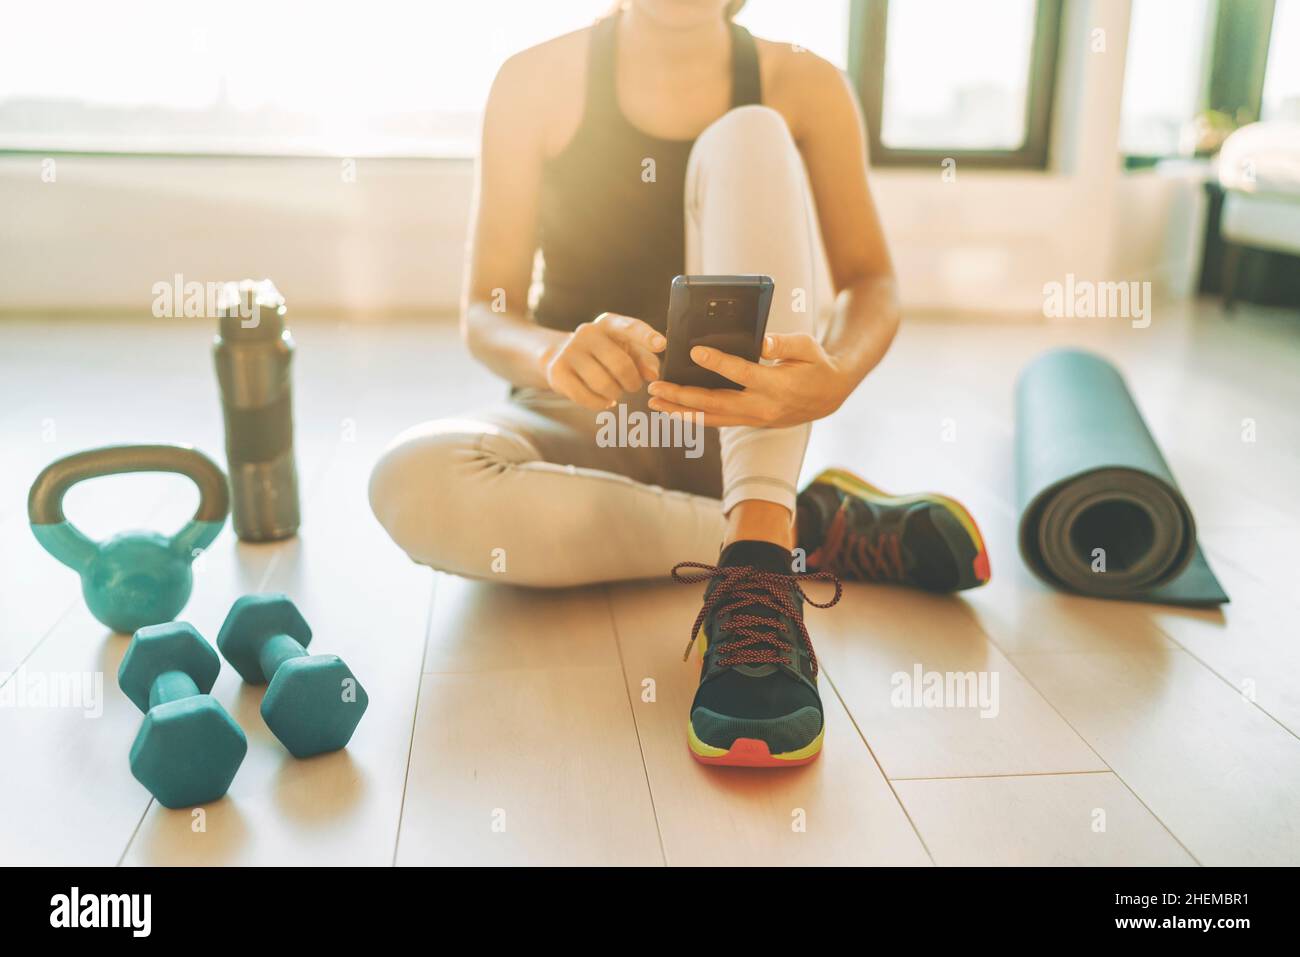 Fitness app on mobile phone for exercise at home. Woman using tech device during strength training workout with dumbbells and kettlebell Stock Photo